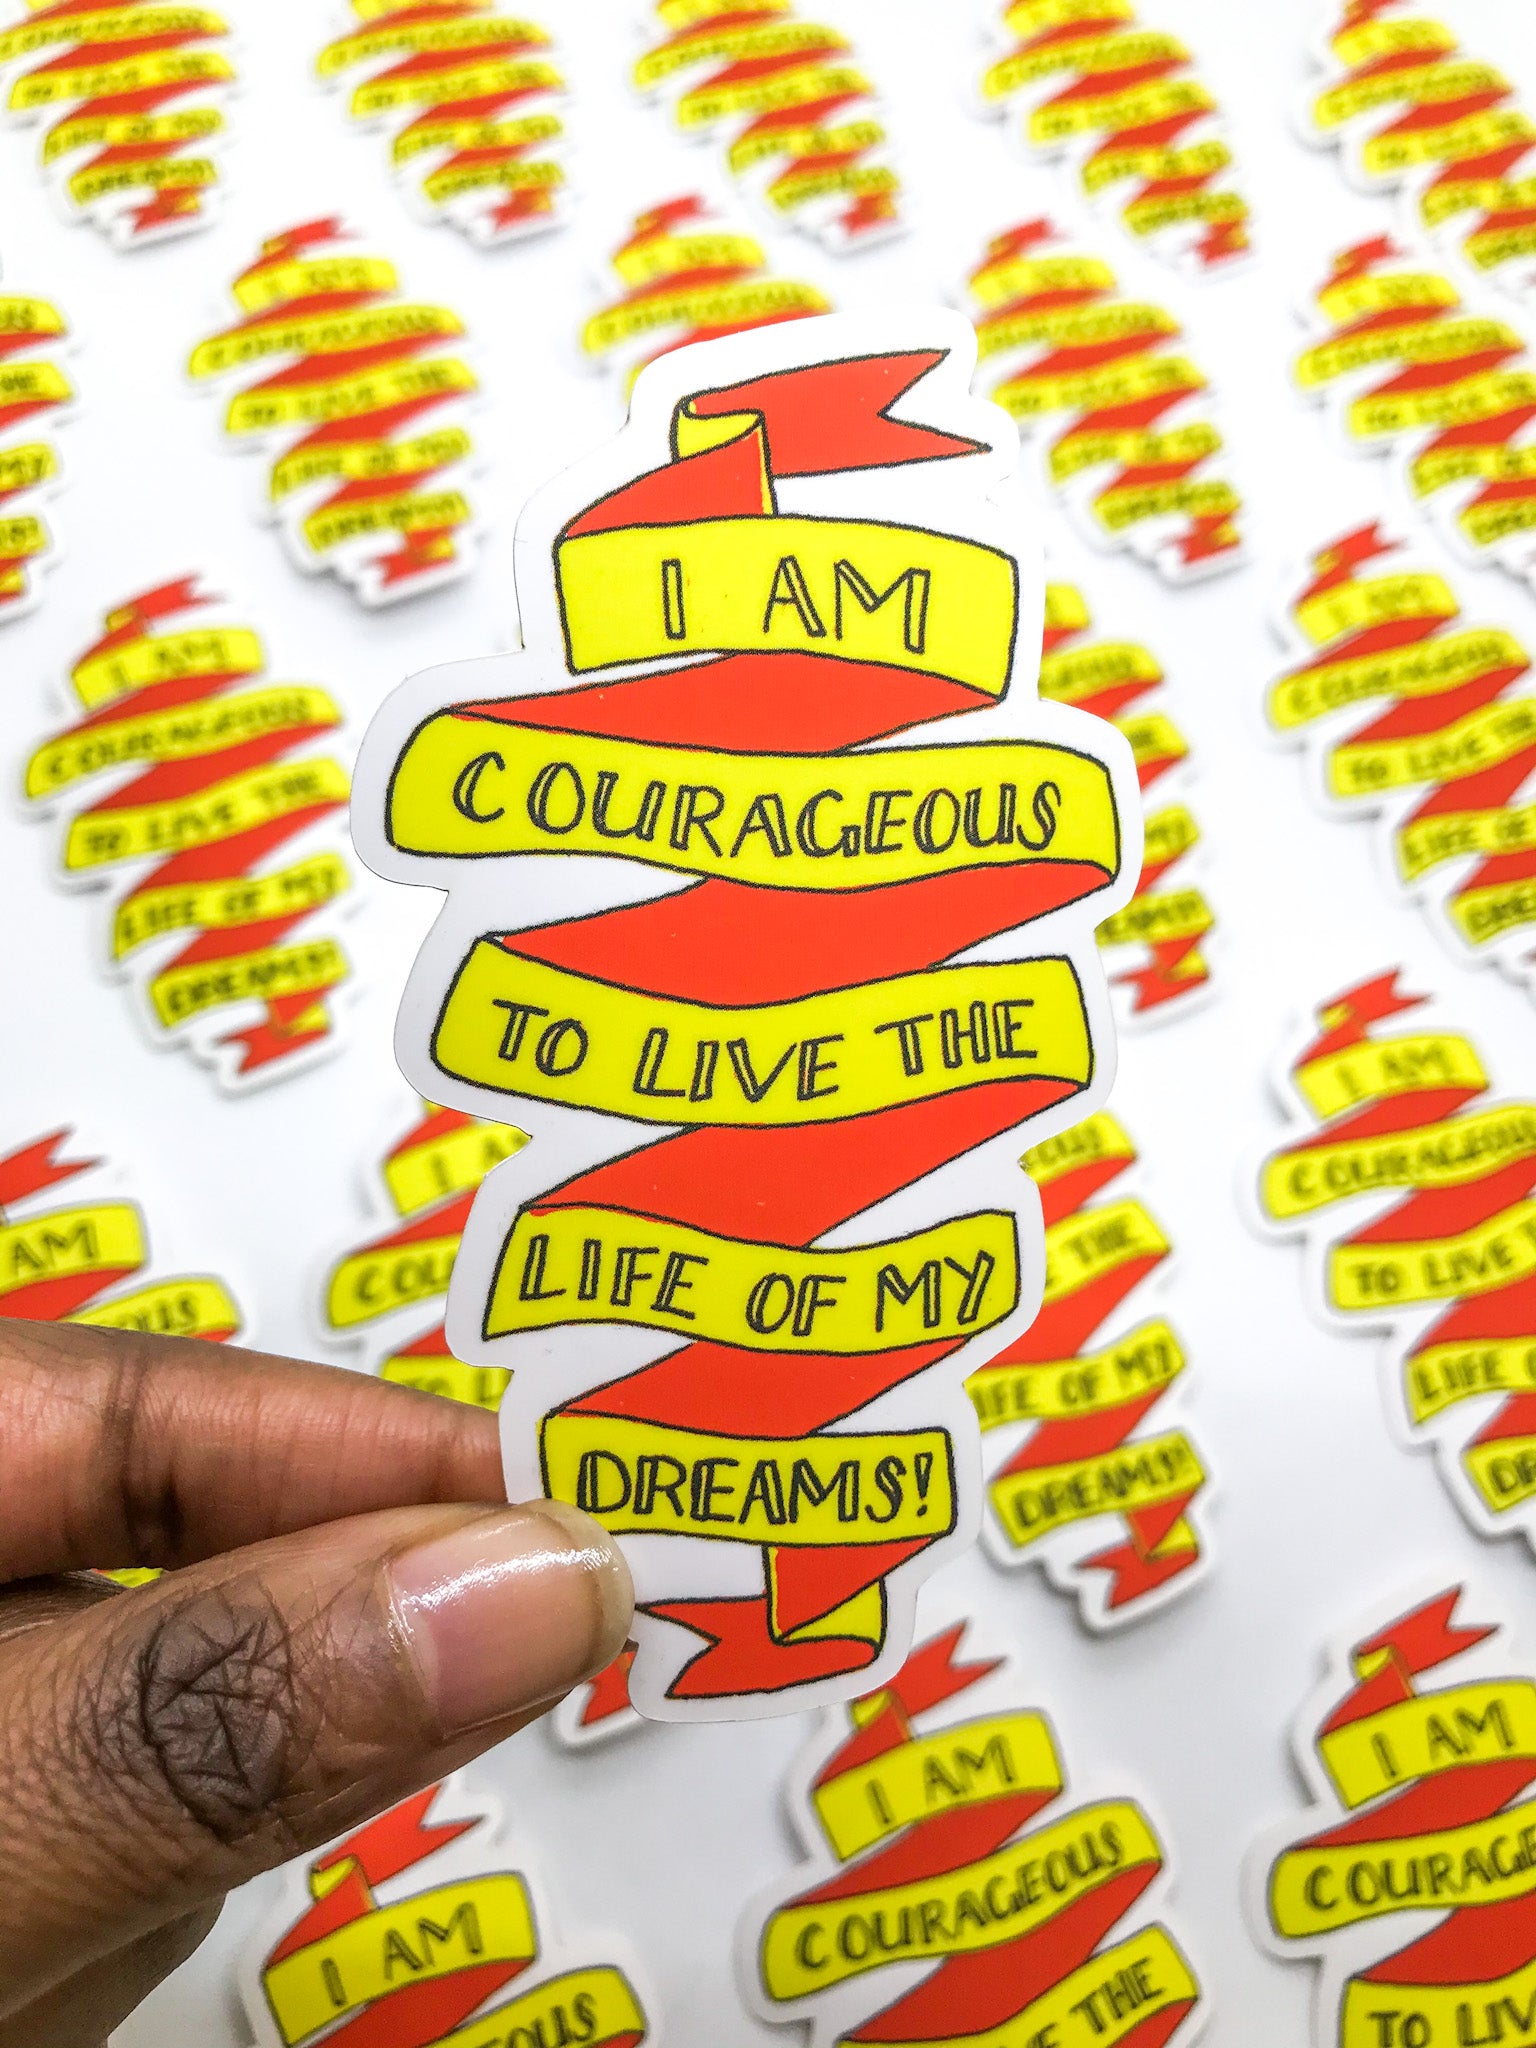 Yellow and red motivational sticker reads, "I AM COURAGEOUS TO LIVE THE LIFE OF MY DREAMS!"